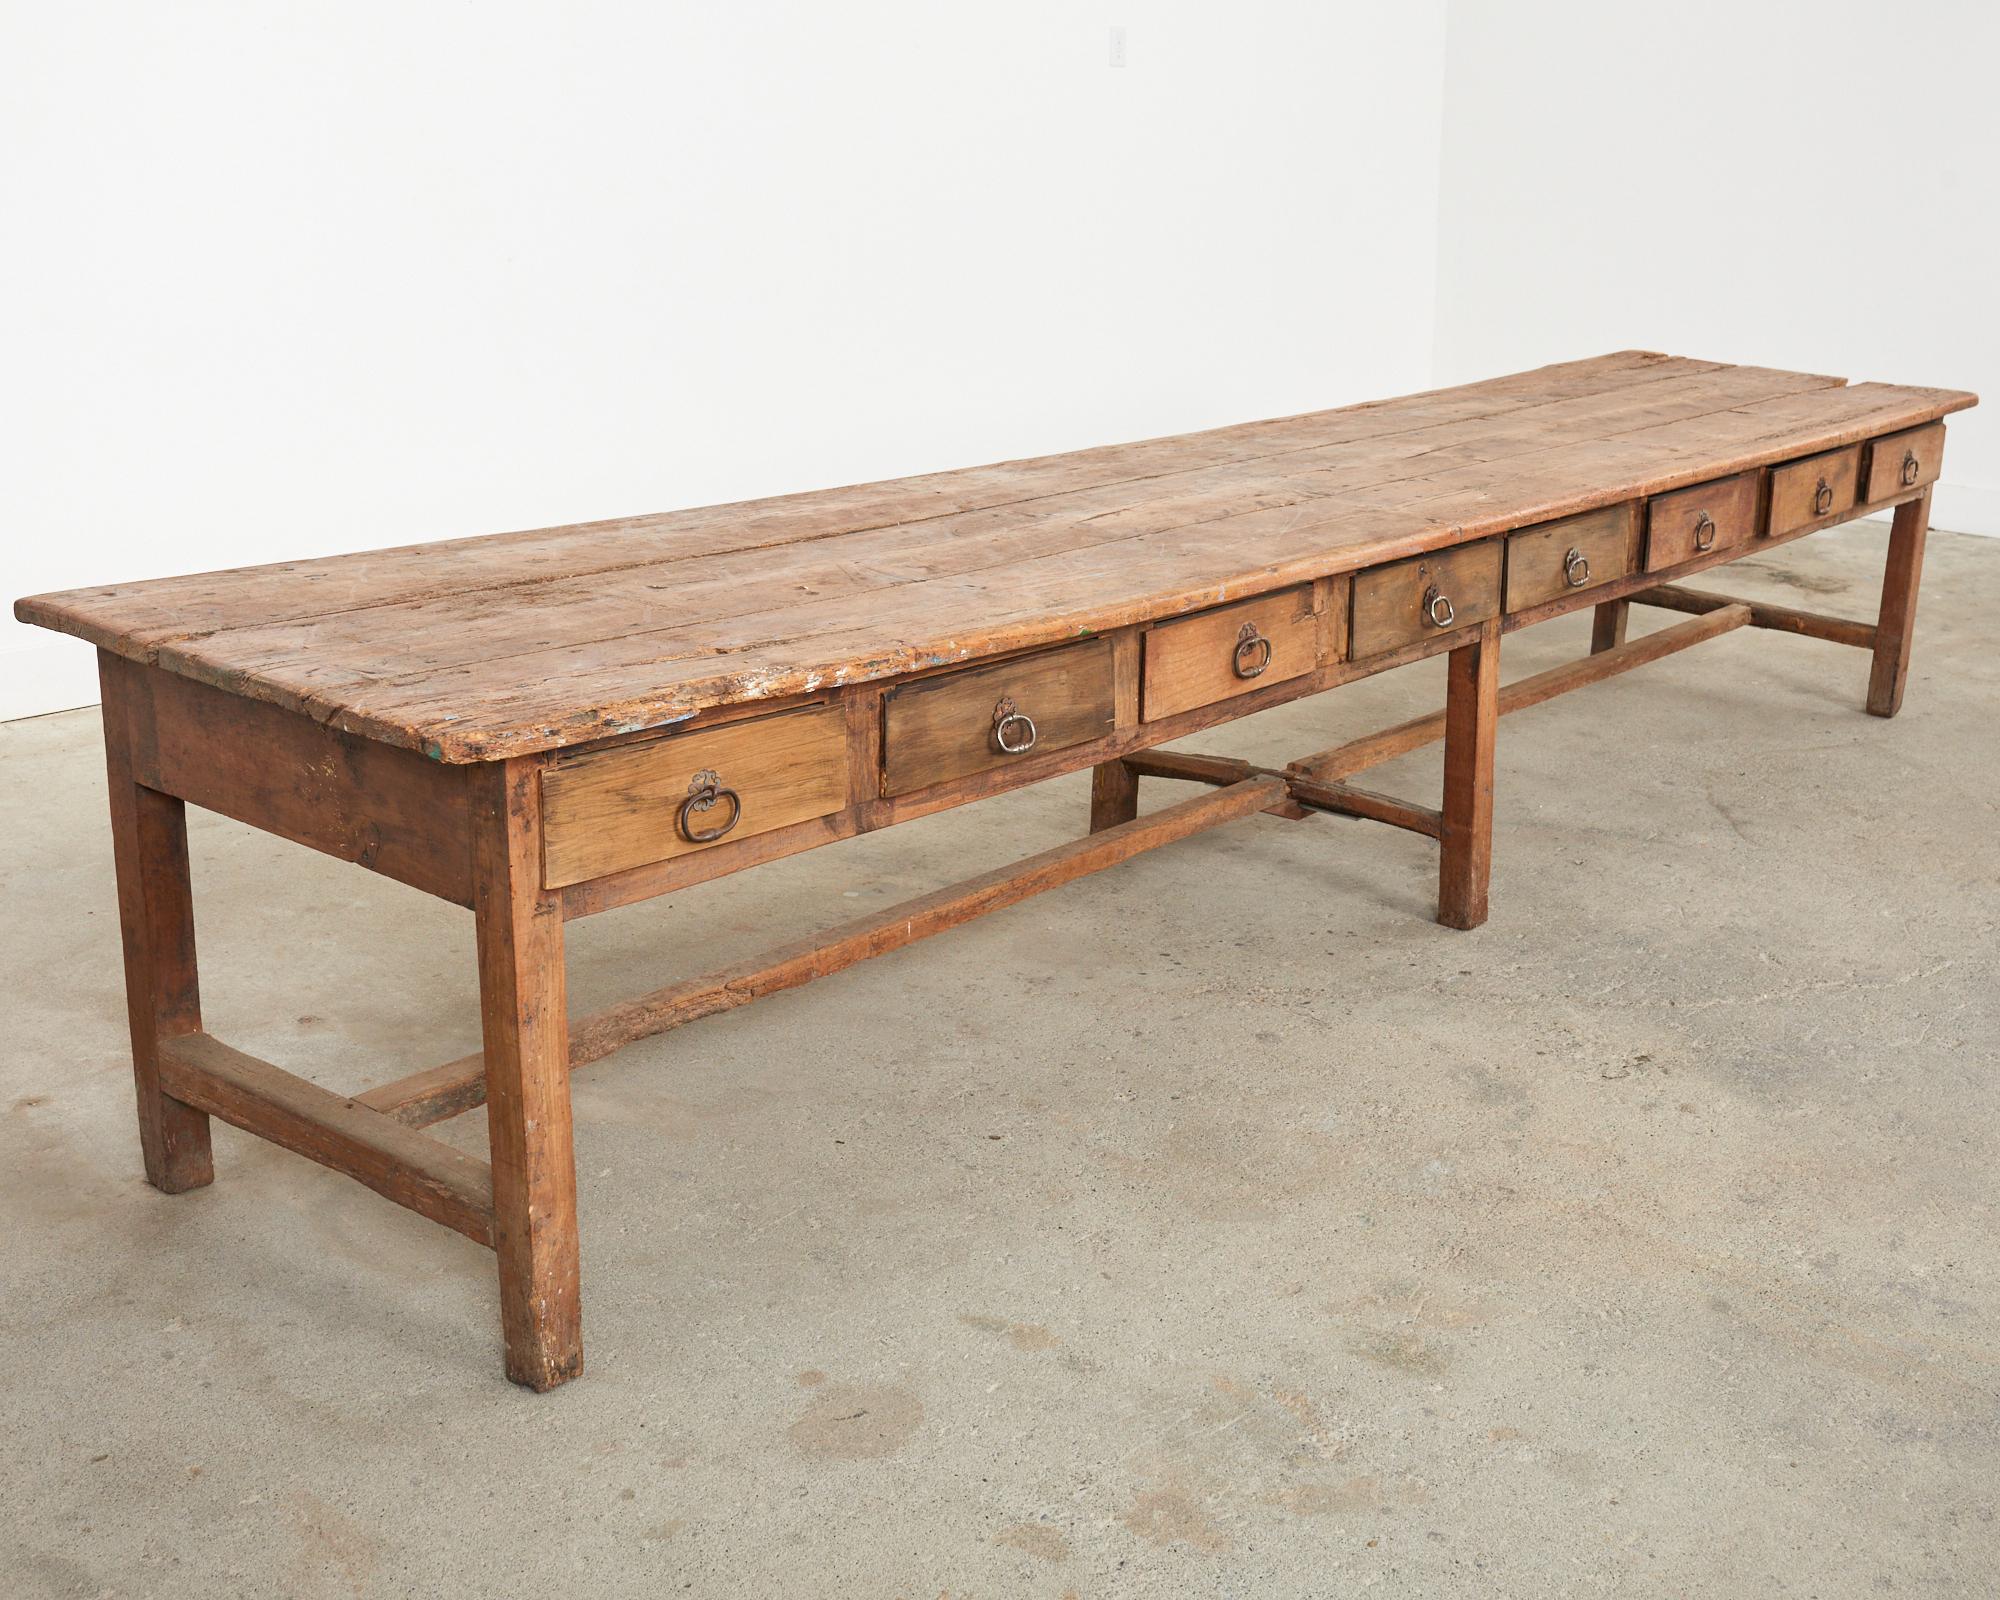 Rare authentic 18th century monumental French drapers trestle table or store display featuring 16 work drawers. This massive work table was used in a mercery or Habadashery by cloth merchants or drapers to cut and sew long bolts of fabric. The